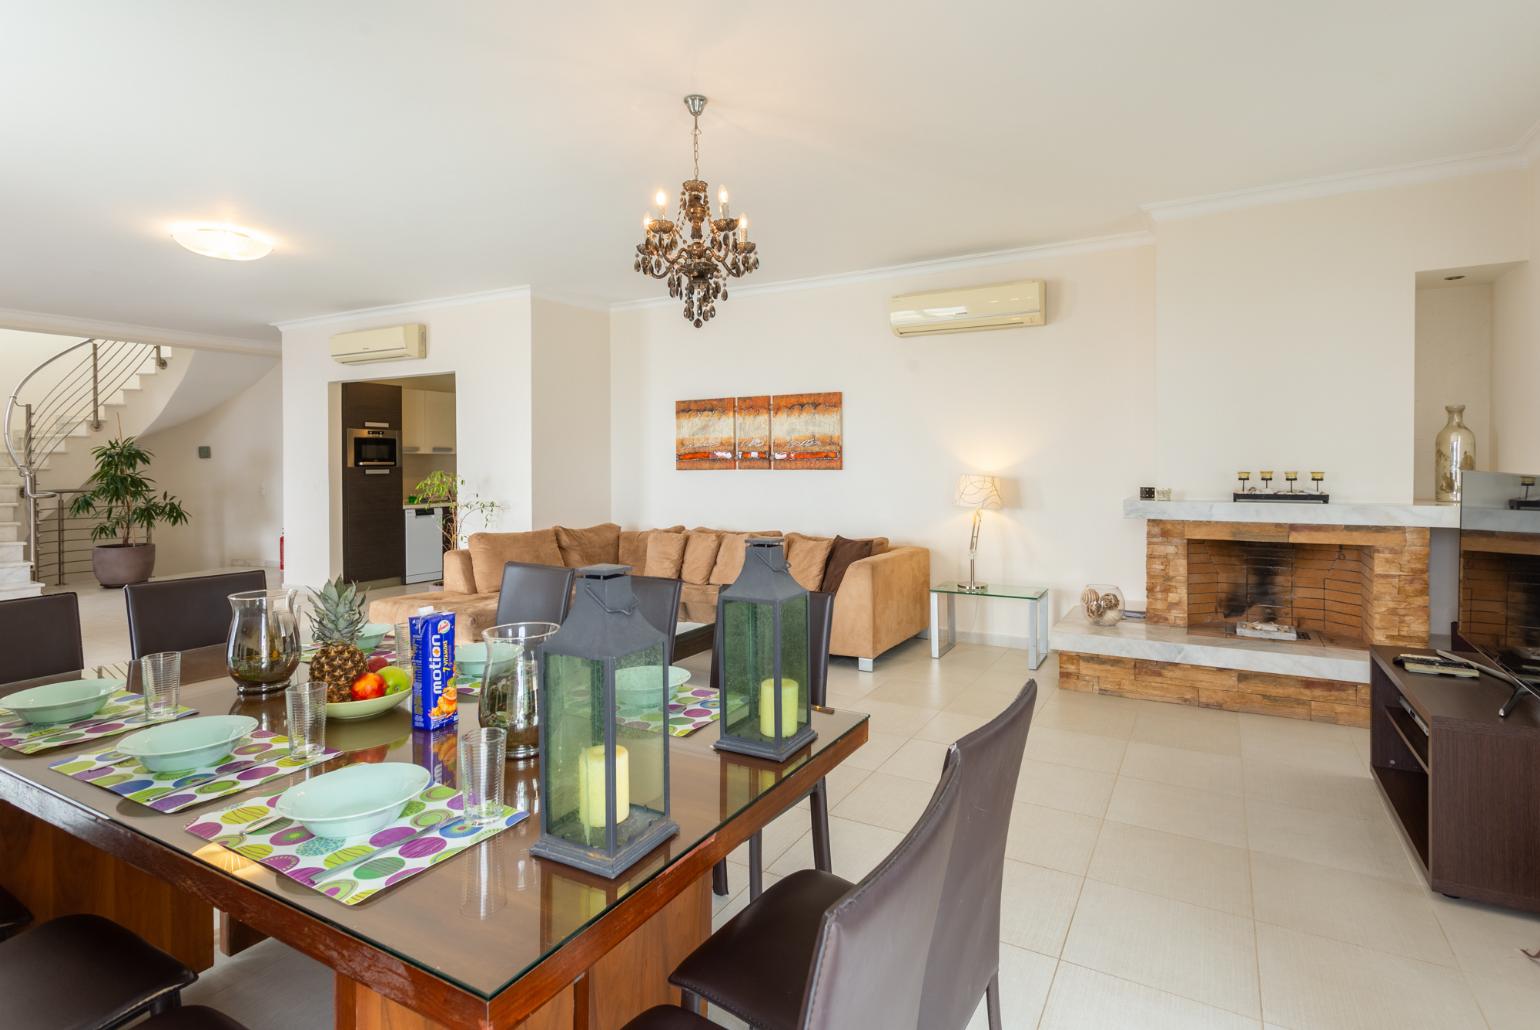 Open-plan living room with sofas, dining area, kitchen, ornamental fireplace, A/C, WiFi internet, satellite TV, and terrace access with sea views